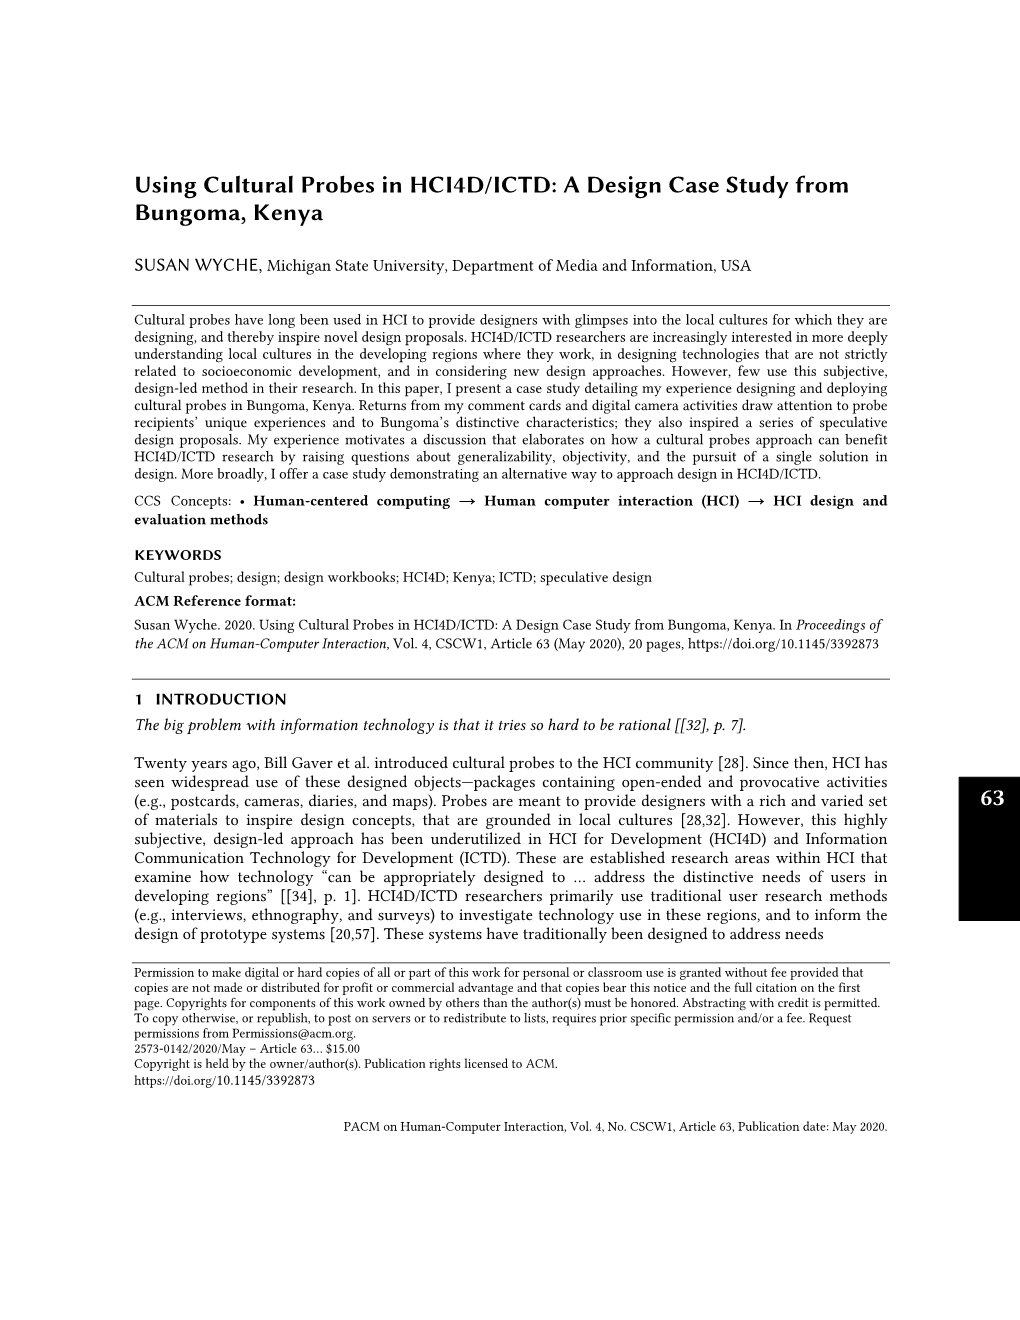 Using Cultural Probes in HCI4D/ICTD: a Design Case Study from Bungoma, Kenya